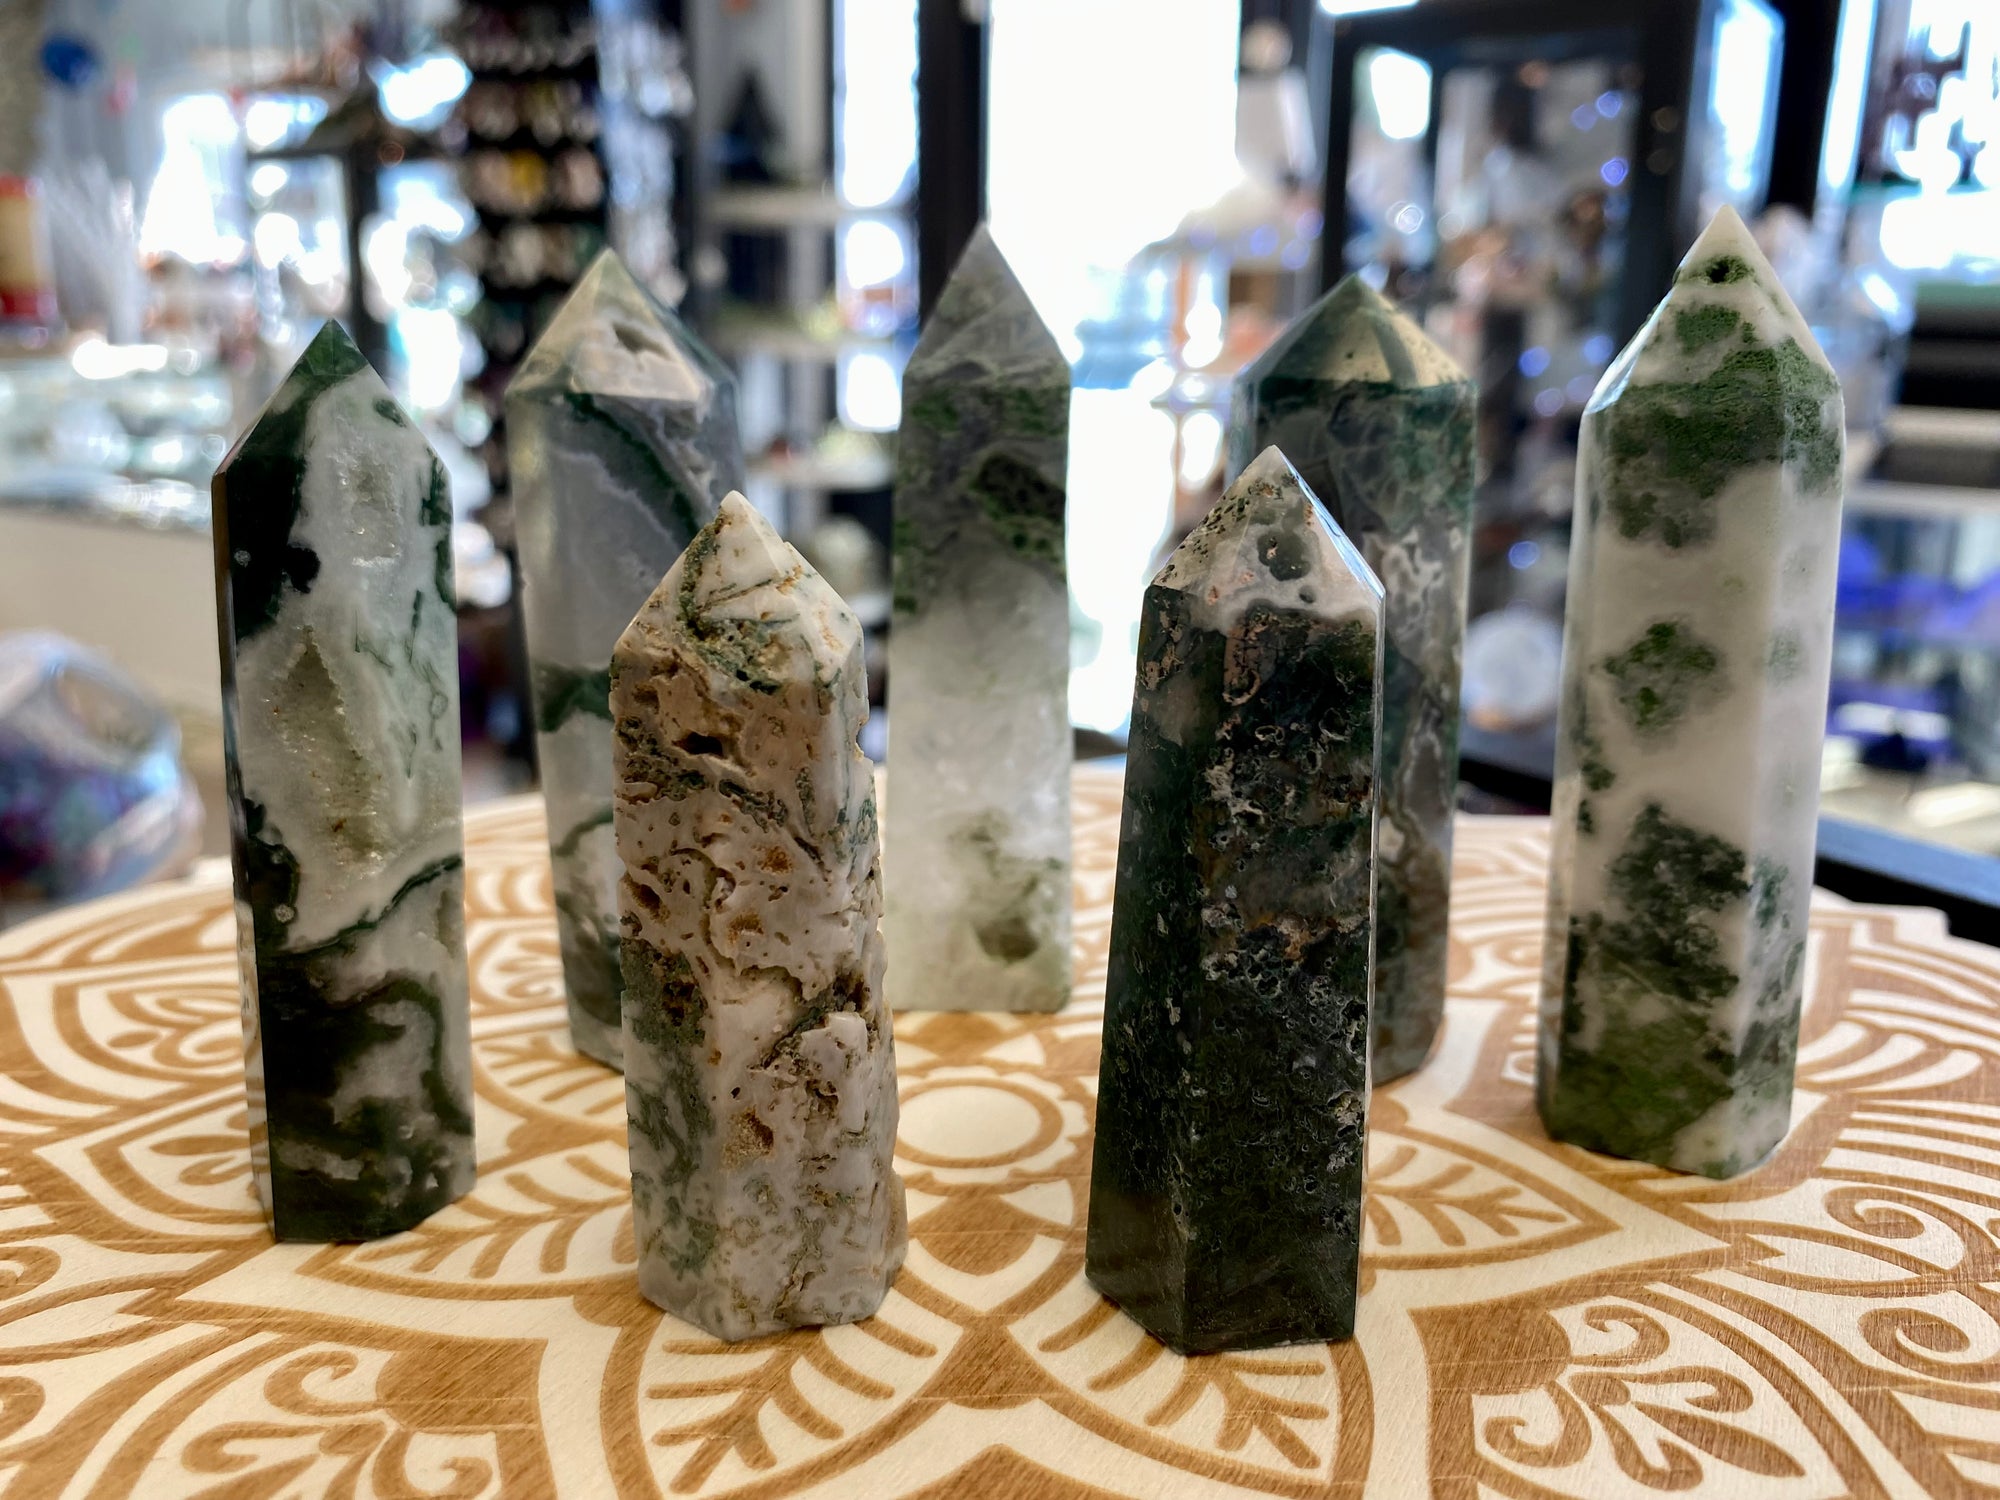 Moss Agate brings peace and stability to the emotional body.  It soothes and promotes inner calm, allowing us to move forward with greater determination.  The deep, clear energy of Moss Agate connects us with Earth energy and the bounty of nature. 